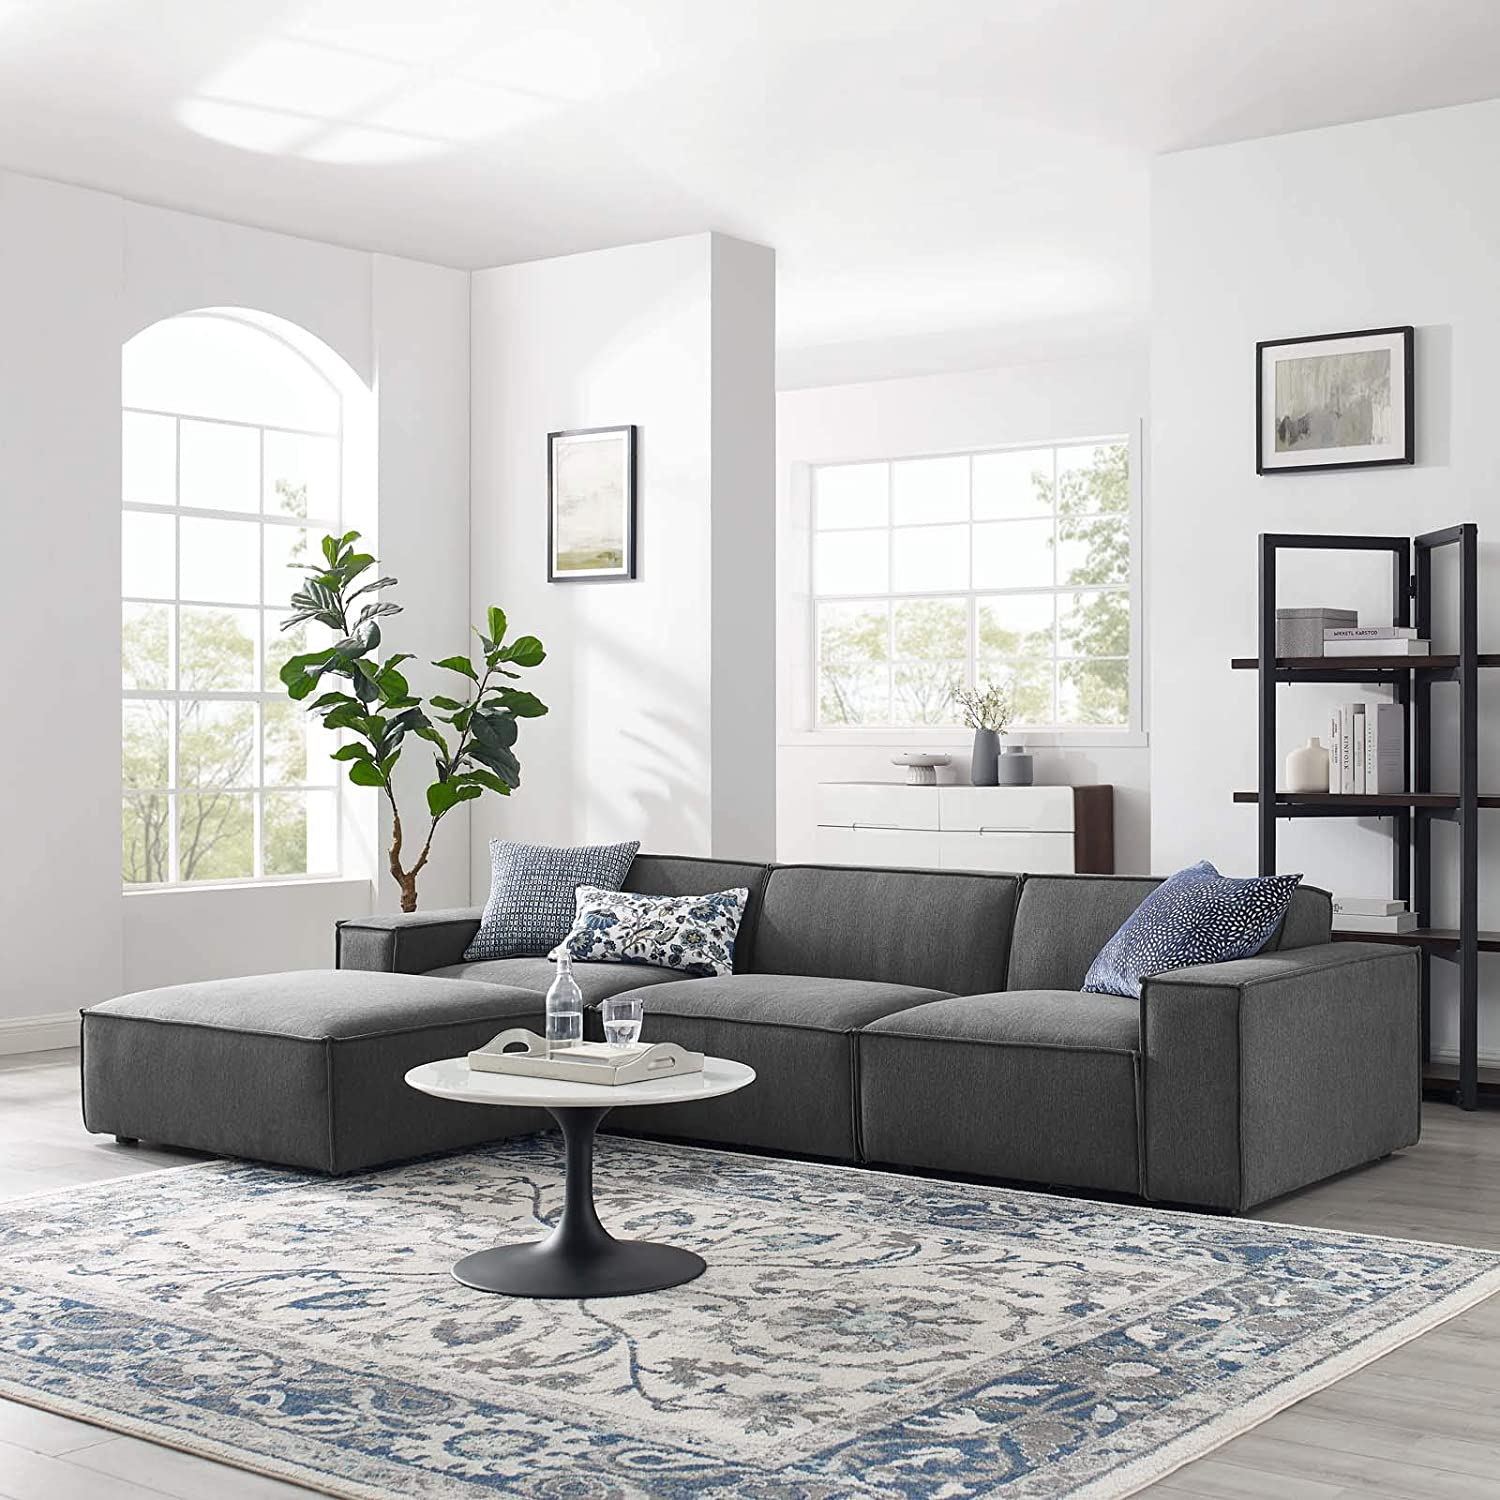 51 sectional sofas for elegant and functional living room seating